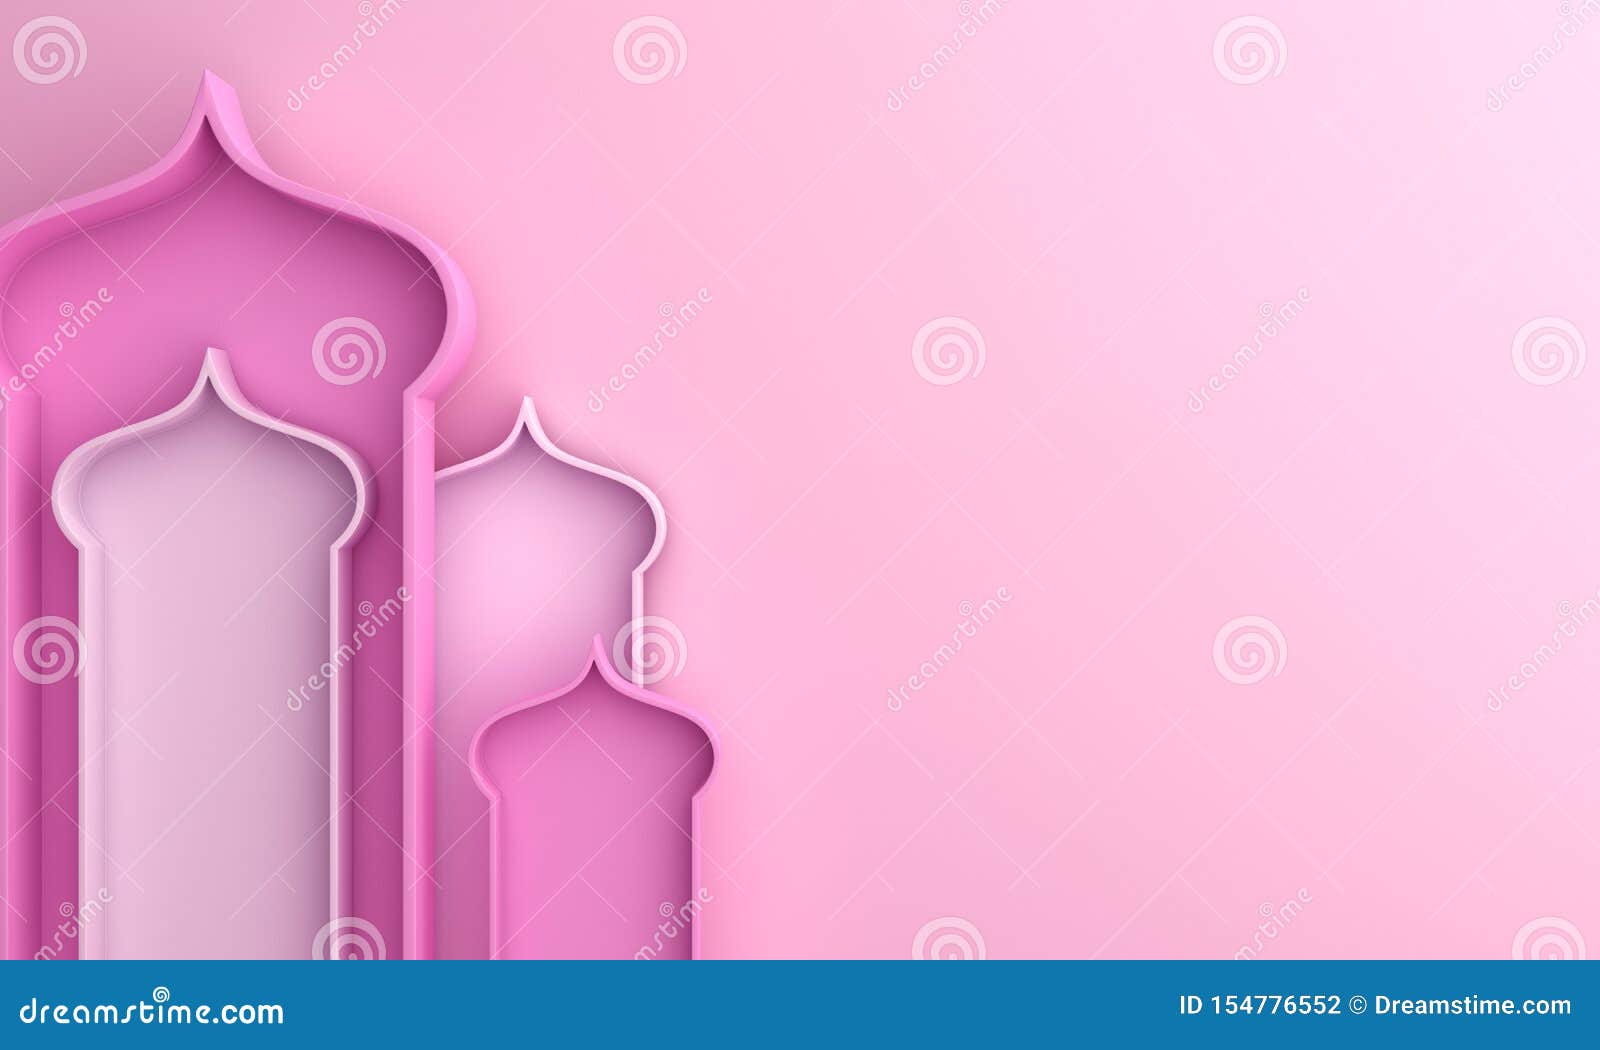 Arabic Window on Pink Pastel Background Copy Space Text. Stock ...